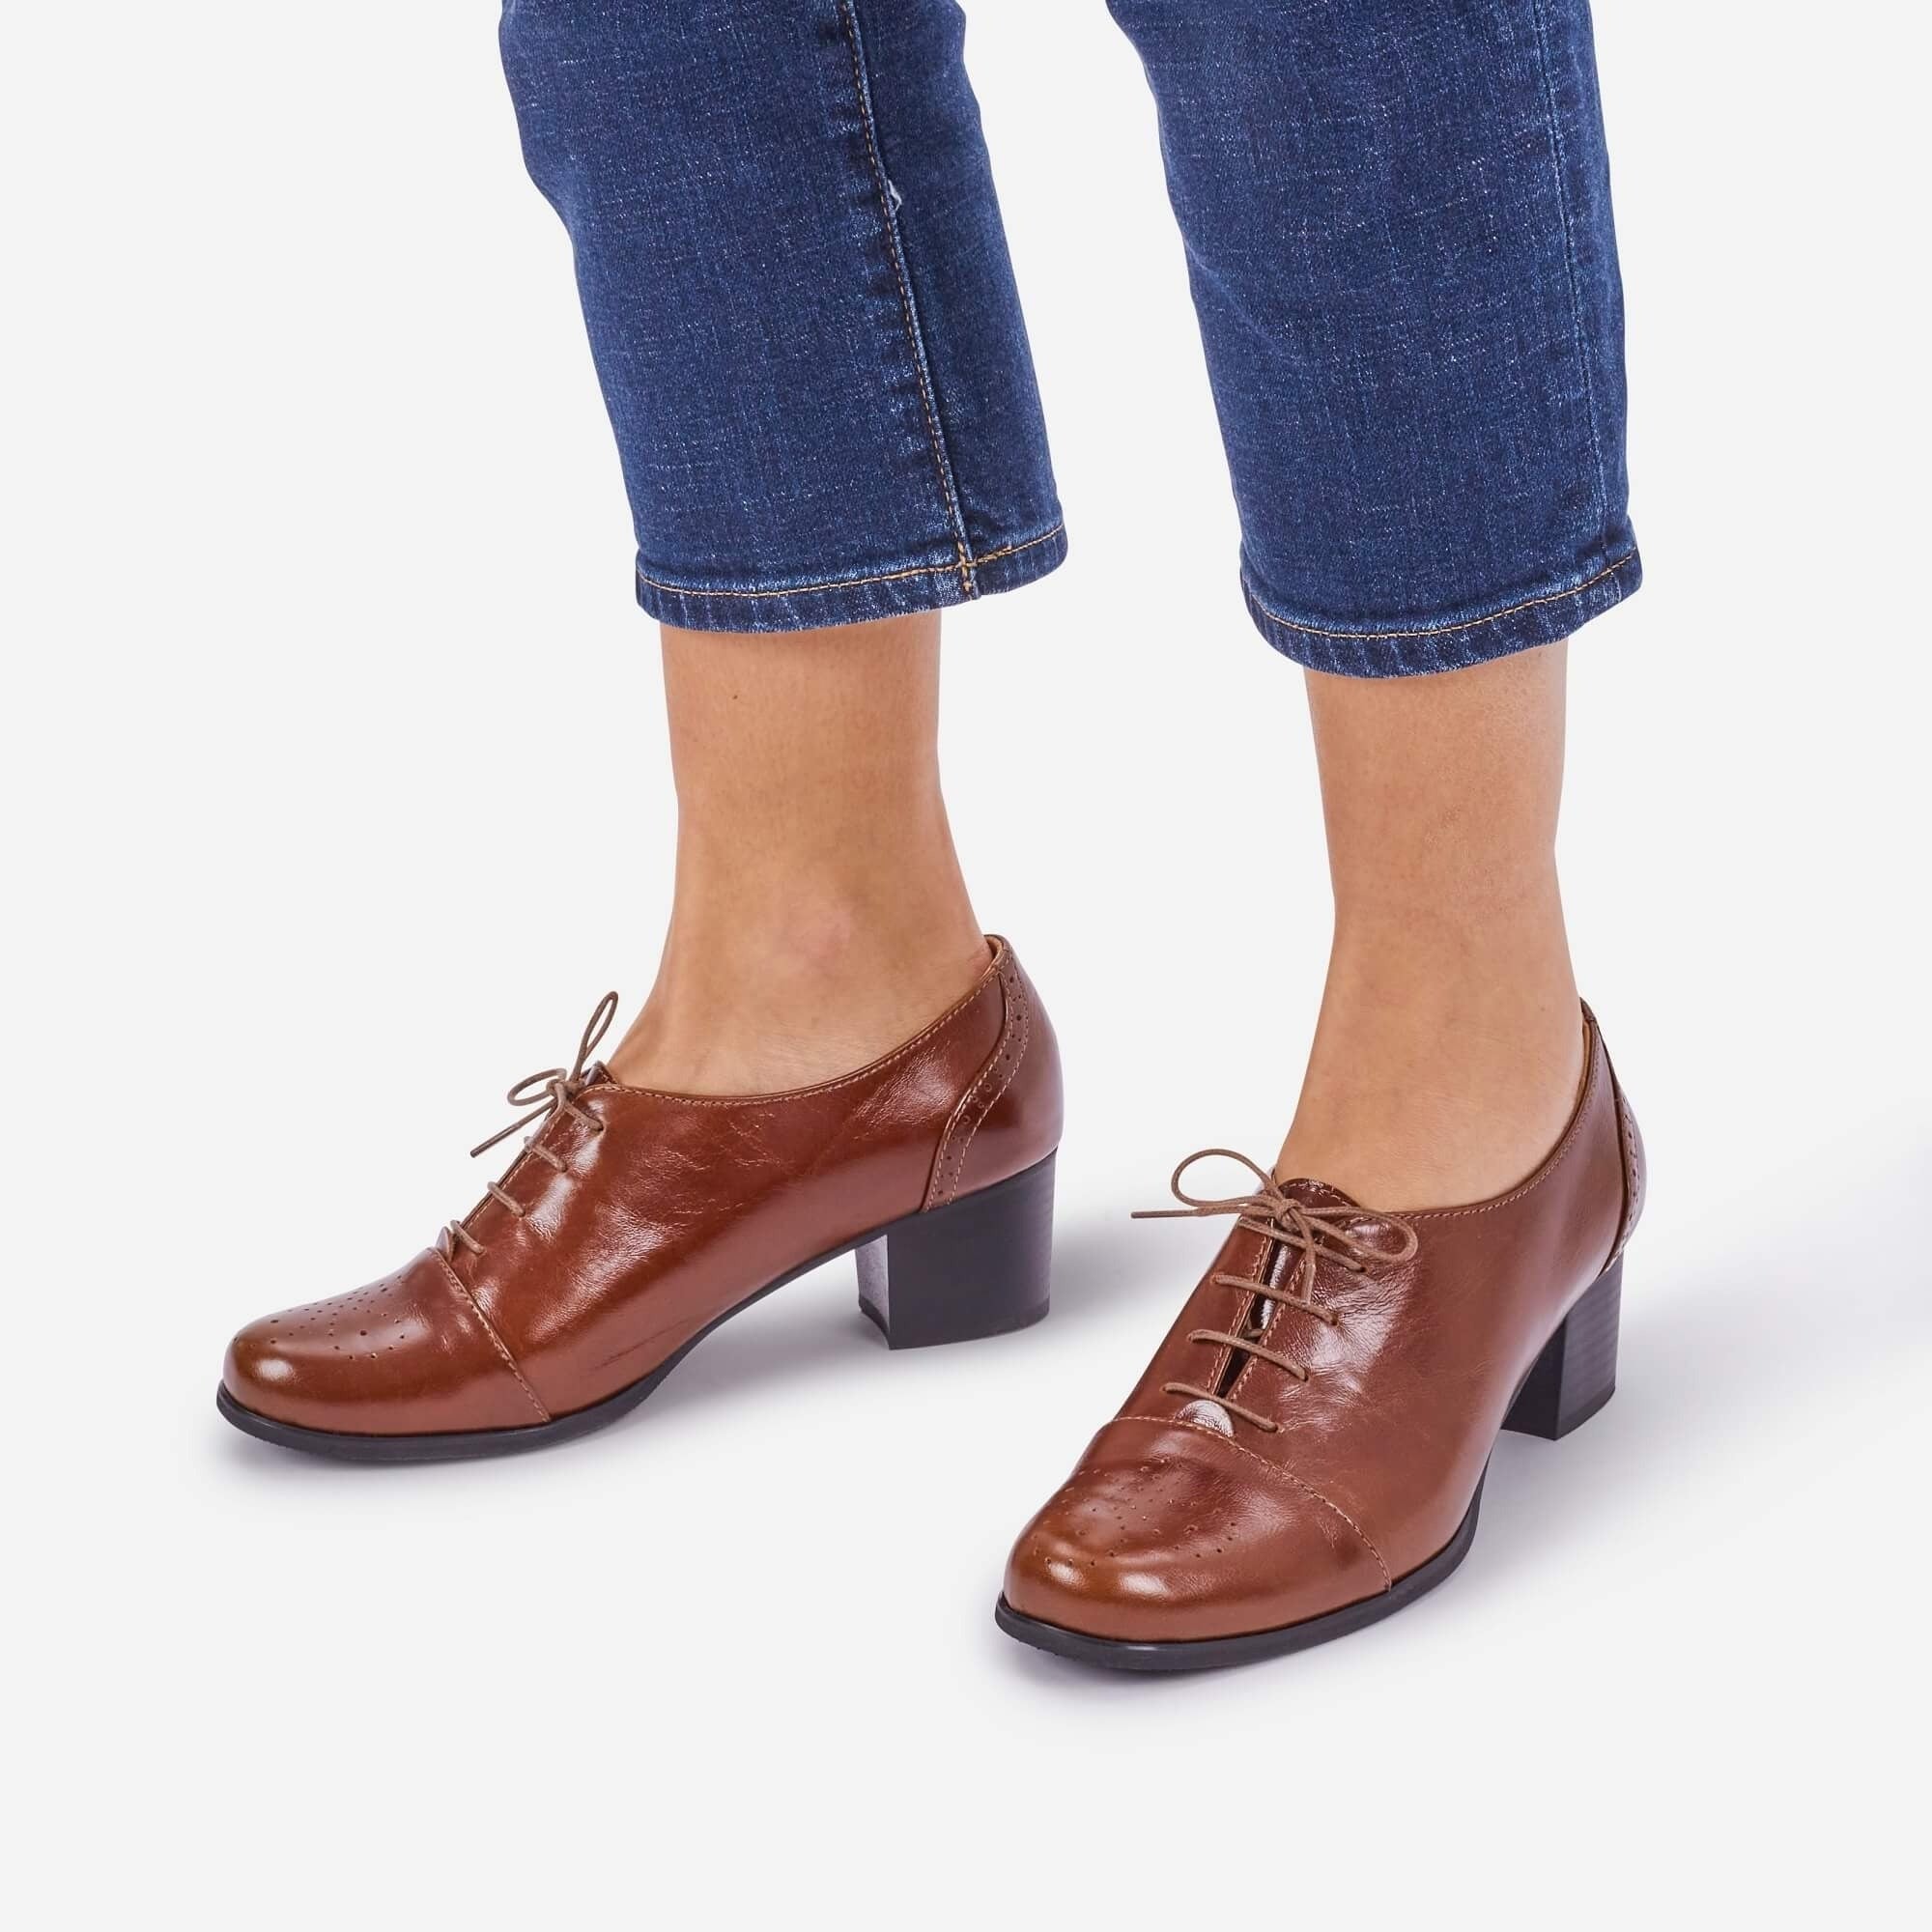 Ollio Women Shoes Classic Laces Up Dress Low Flat Heels Oxford M1914(7.5  B(M) US, Brown) on Galleon Philippines